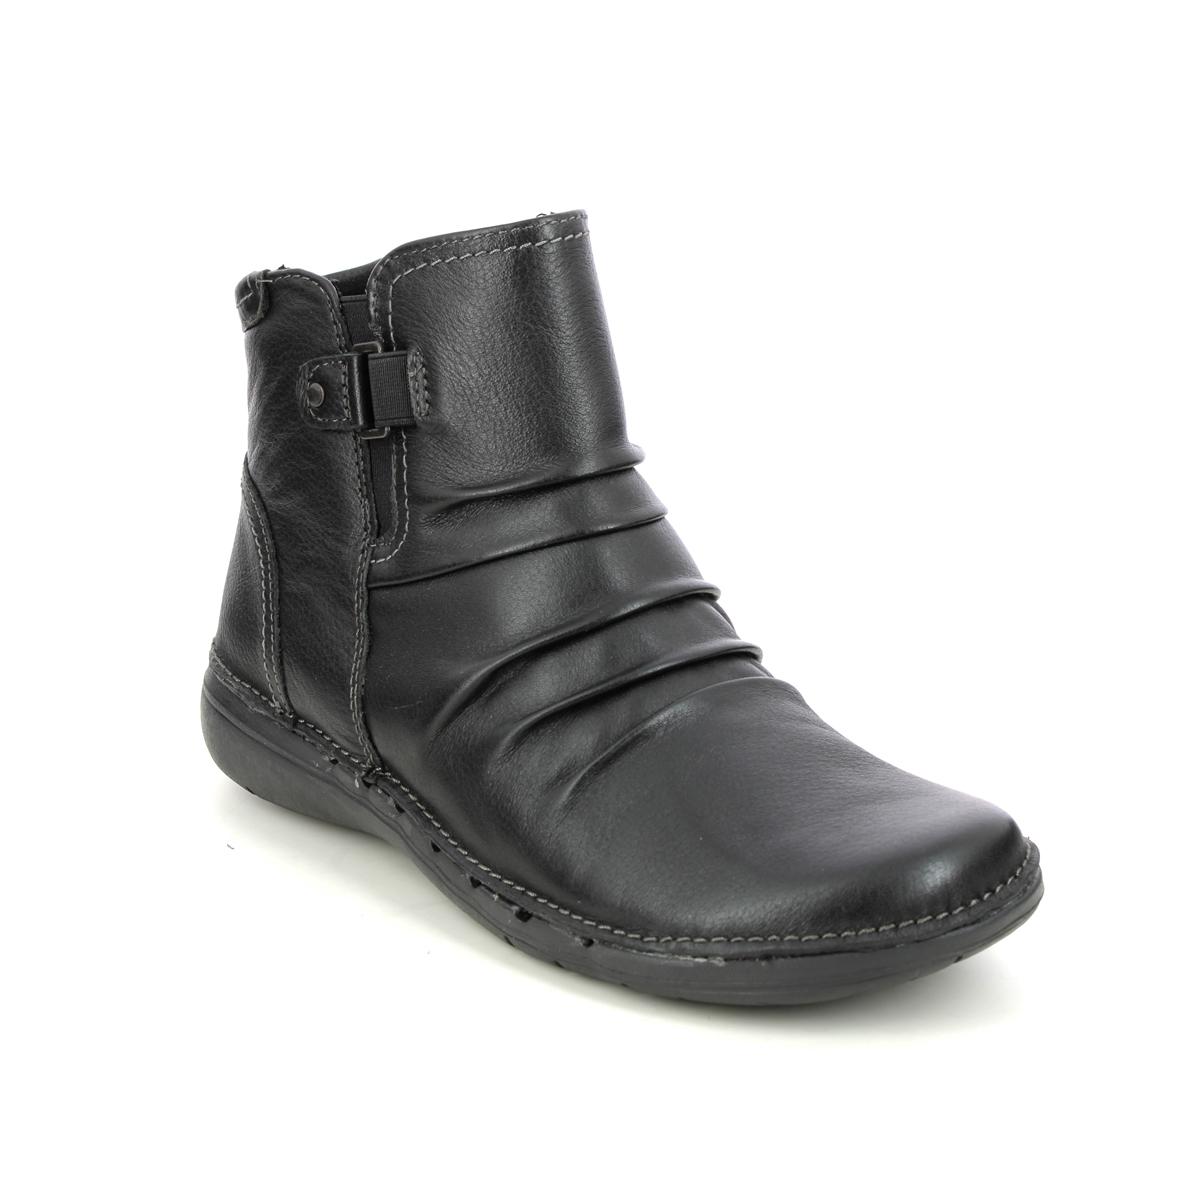 Clarks Un Loop Top Black leather Womens Ankle Boots 6867-34D in a Plain Leather in Size 5